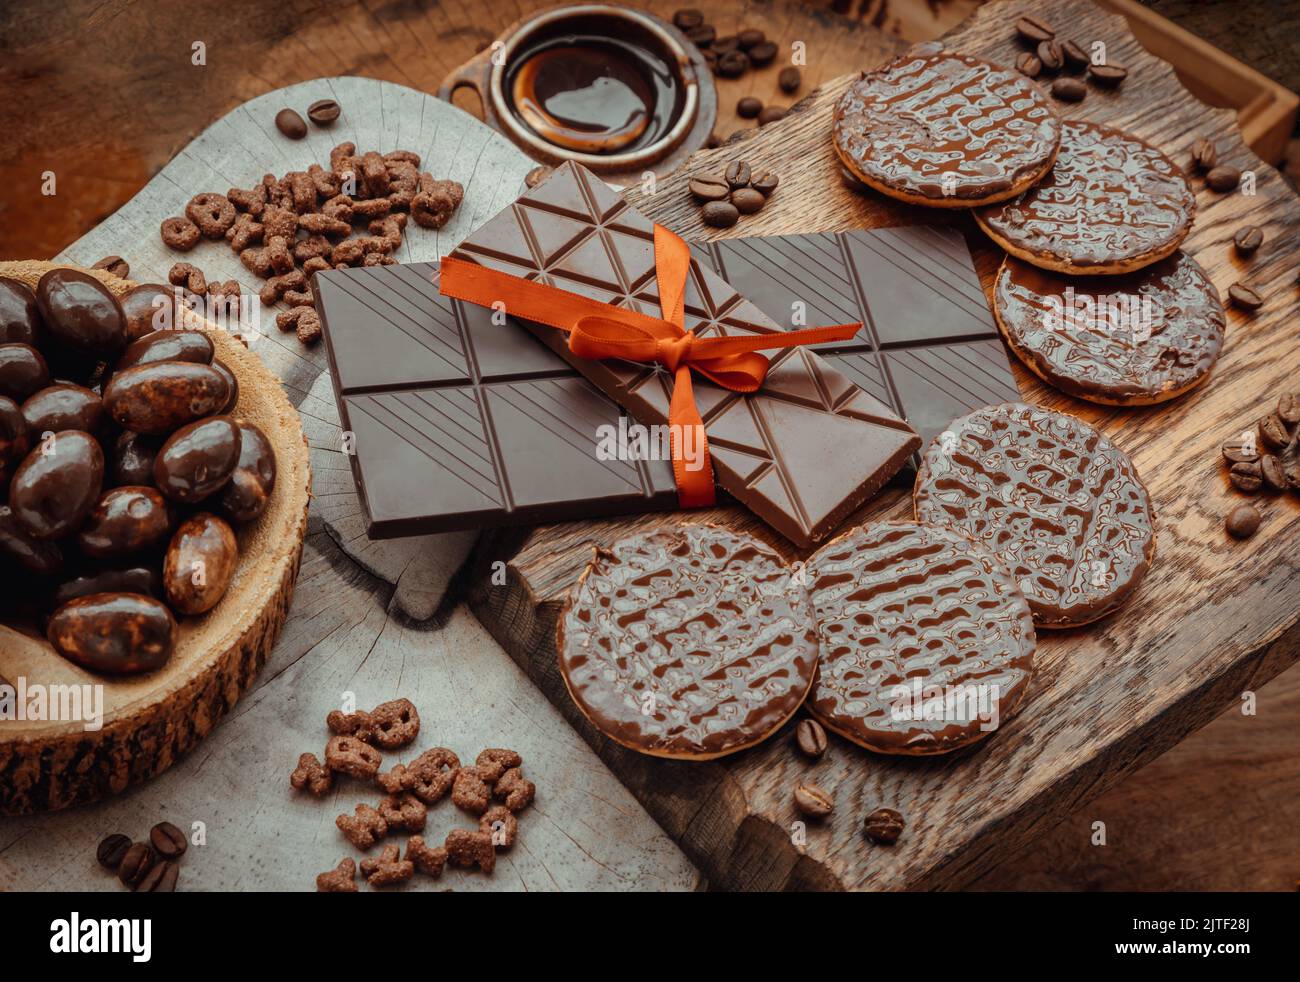 Composition of different Dark chocolate bars and pieces, Melted chocolate and Coffee beans on Old wooden background. Selective Focus. Stock Photo